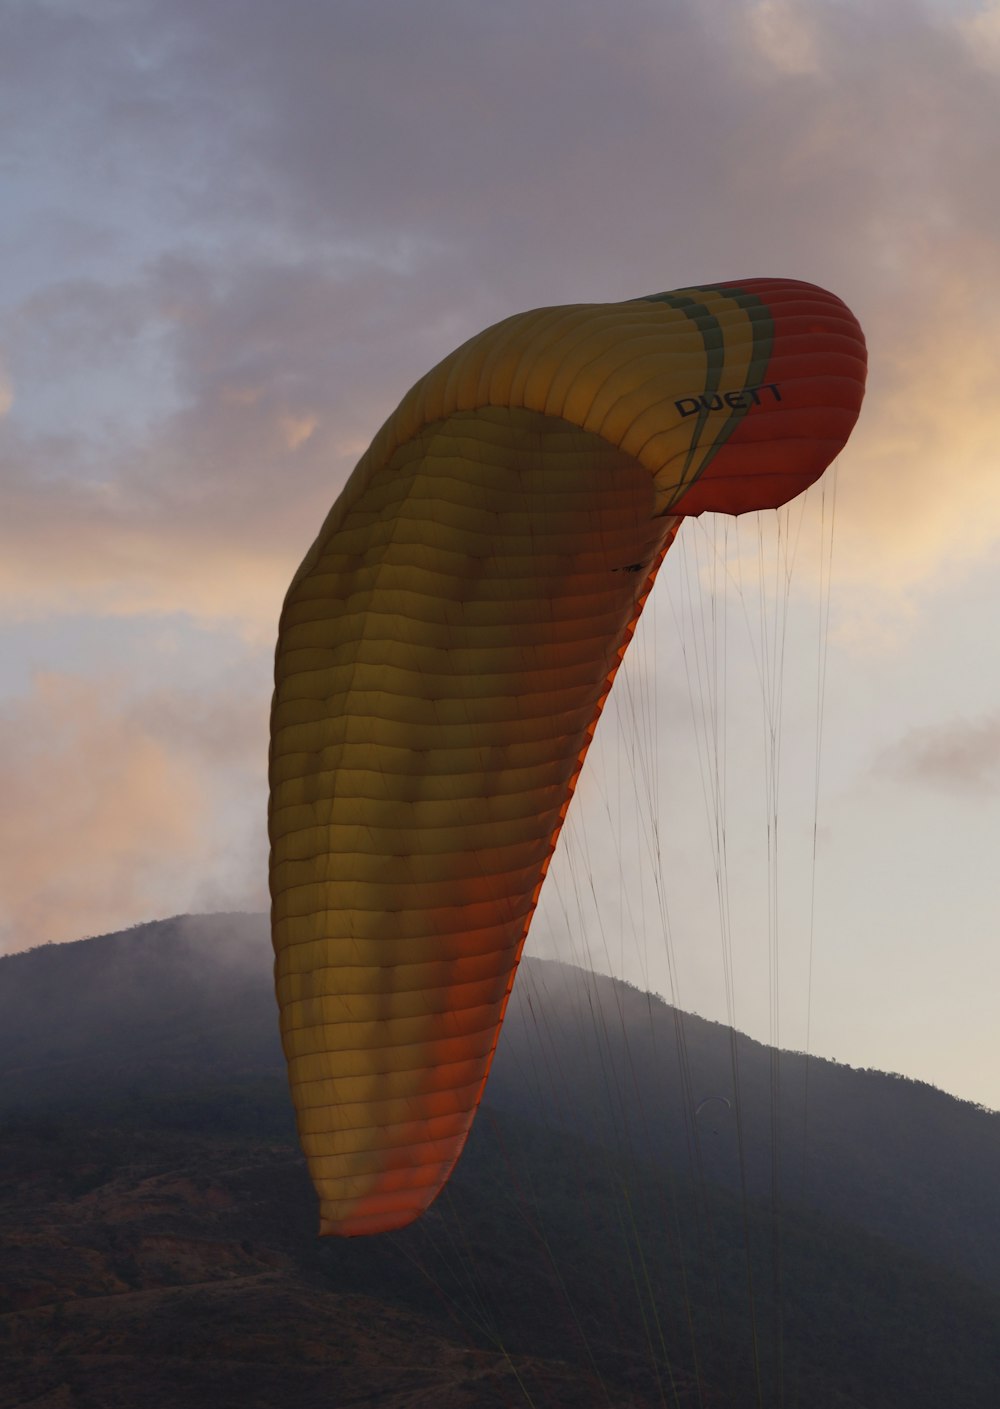 red and yellow parachute during daytime